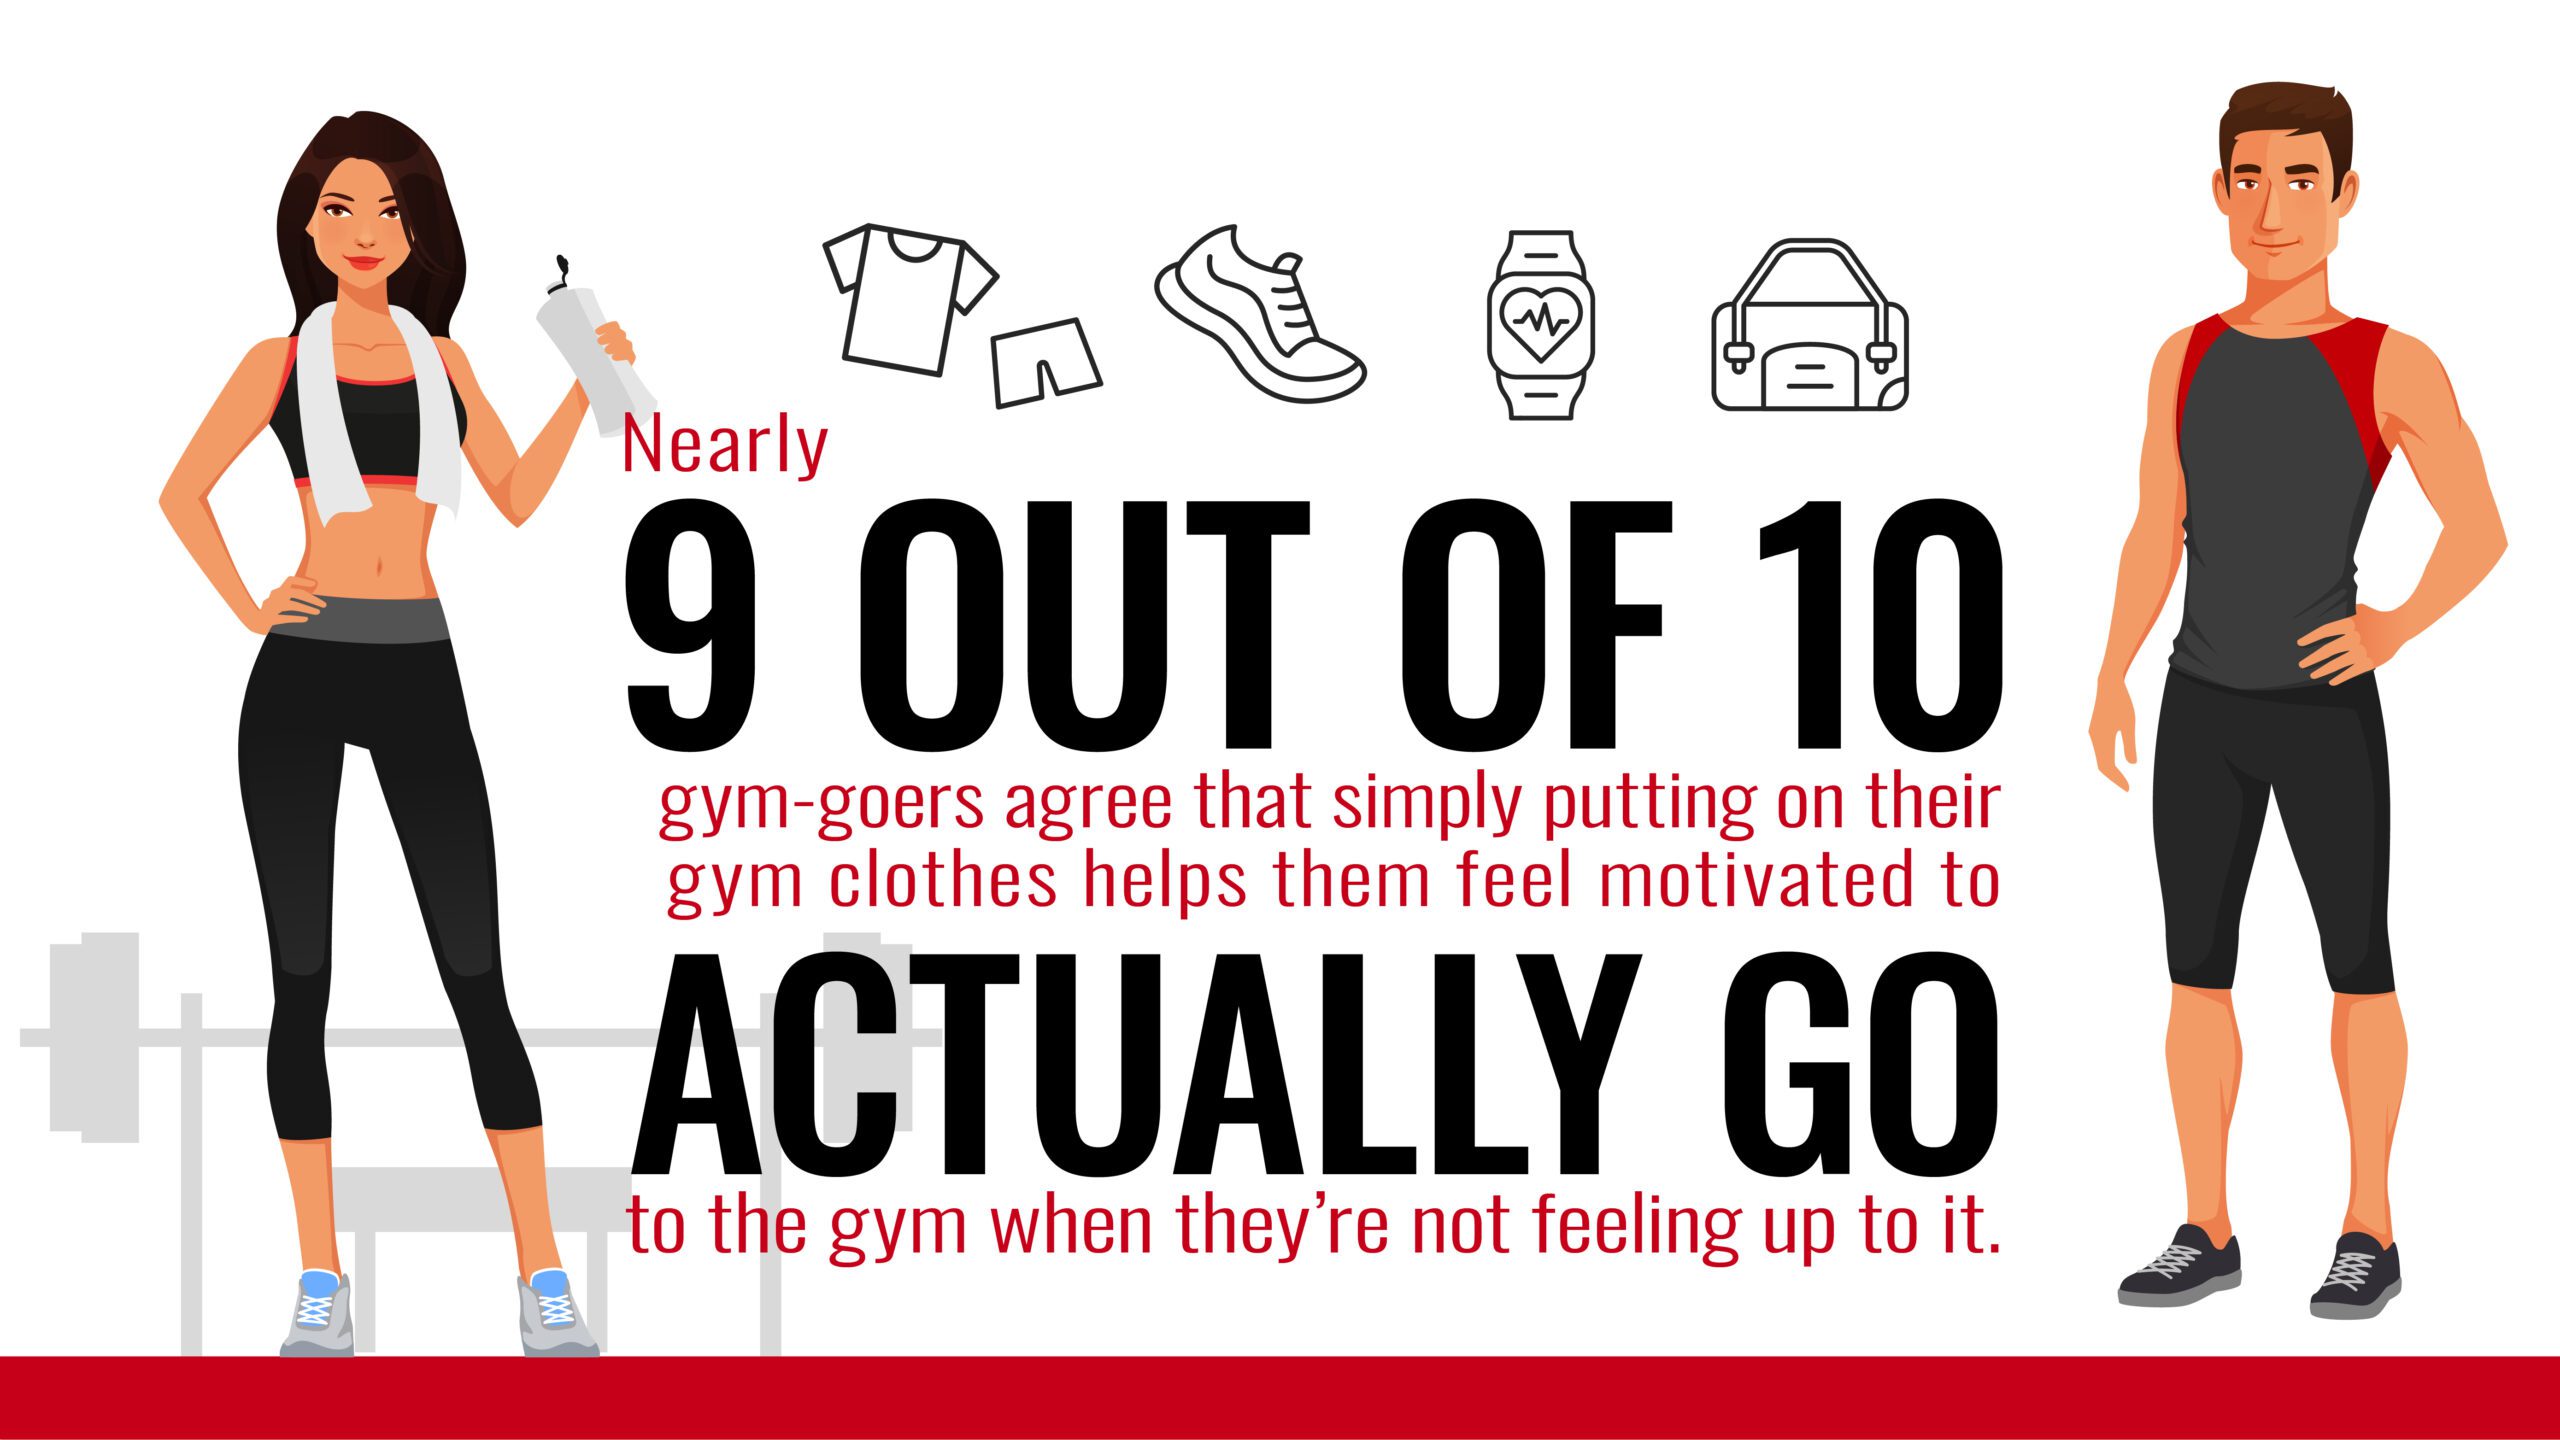 The secret to getting fit is getting new clothes, study finds